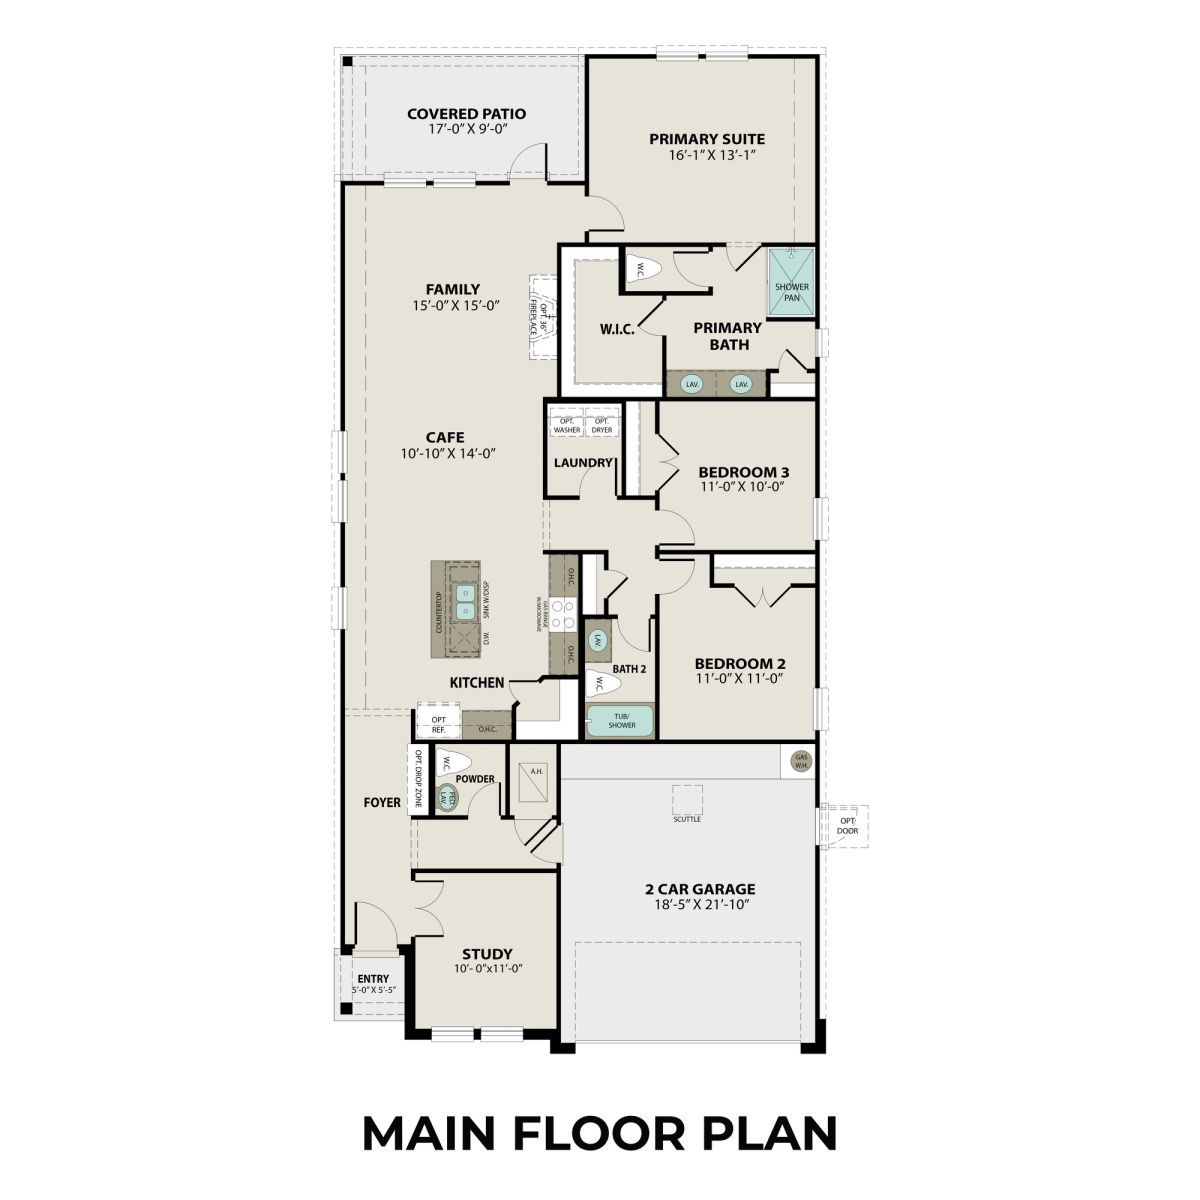 1 - The Riviera A buildable floor plan layout in Davidson Homes' Sierra Vista community.